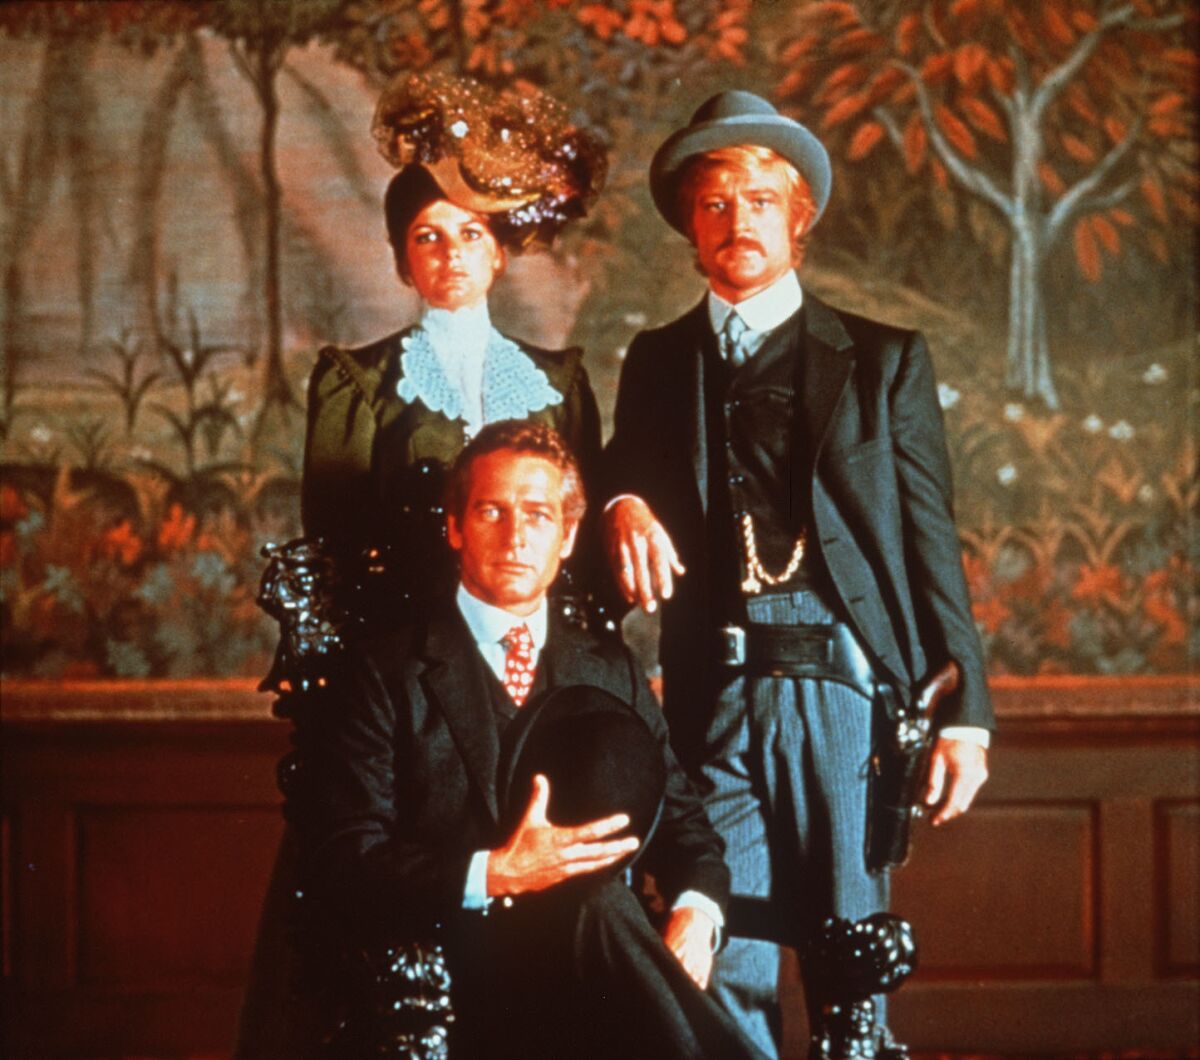 Katharine Ross, left, Paul Newman and Robert Redford in the 1969 Western "Butch Cassidy and the Sundance Kid" on Encore.